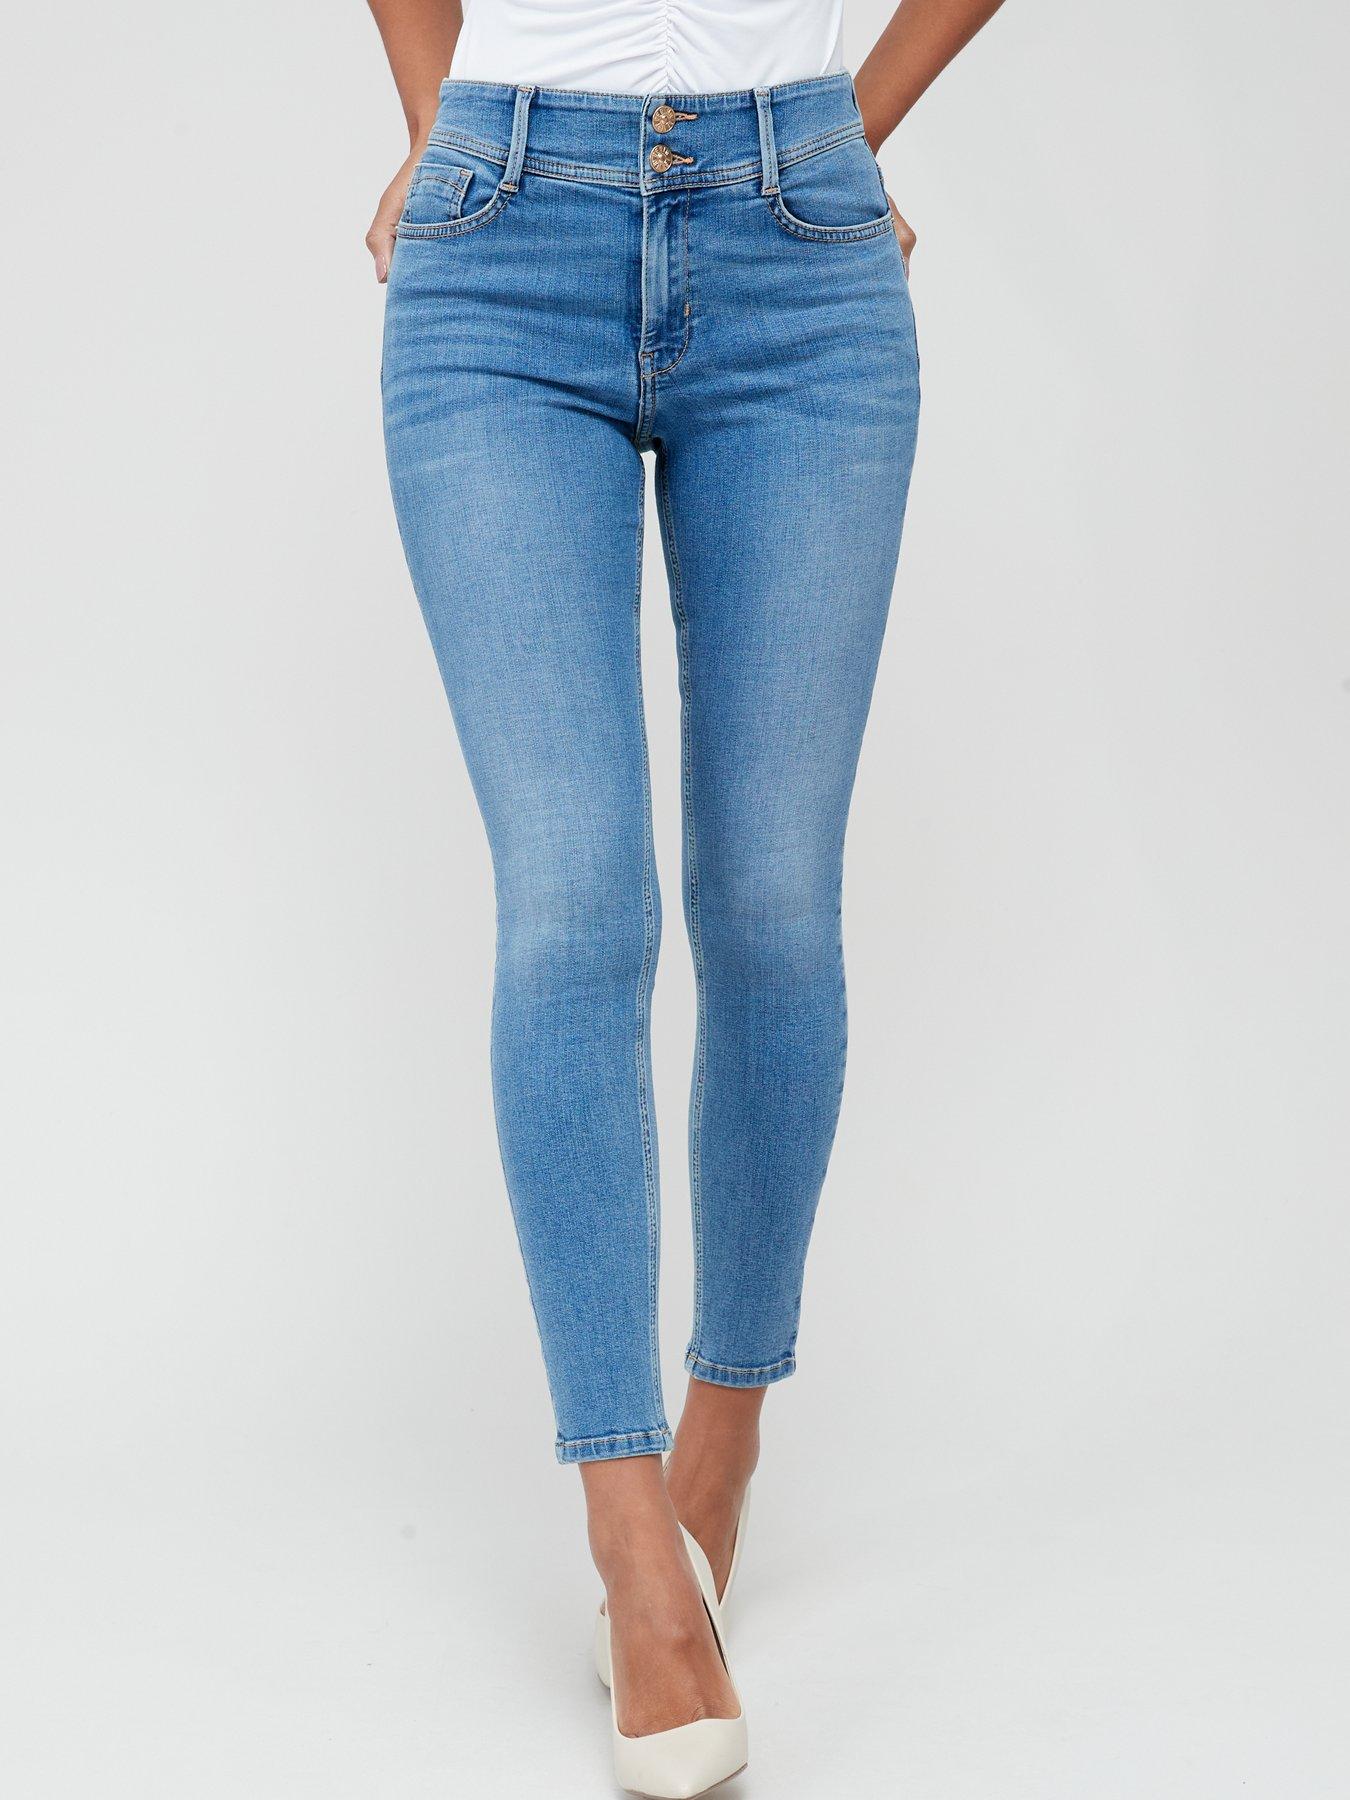 River Island Molly Mid Rise Super Skinny Fit Jeans - Blue